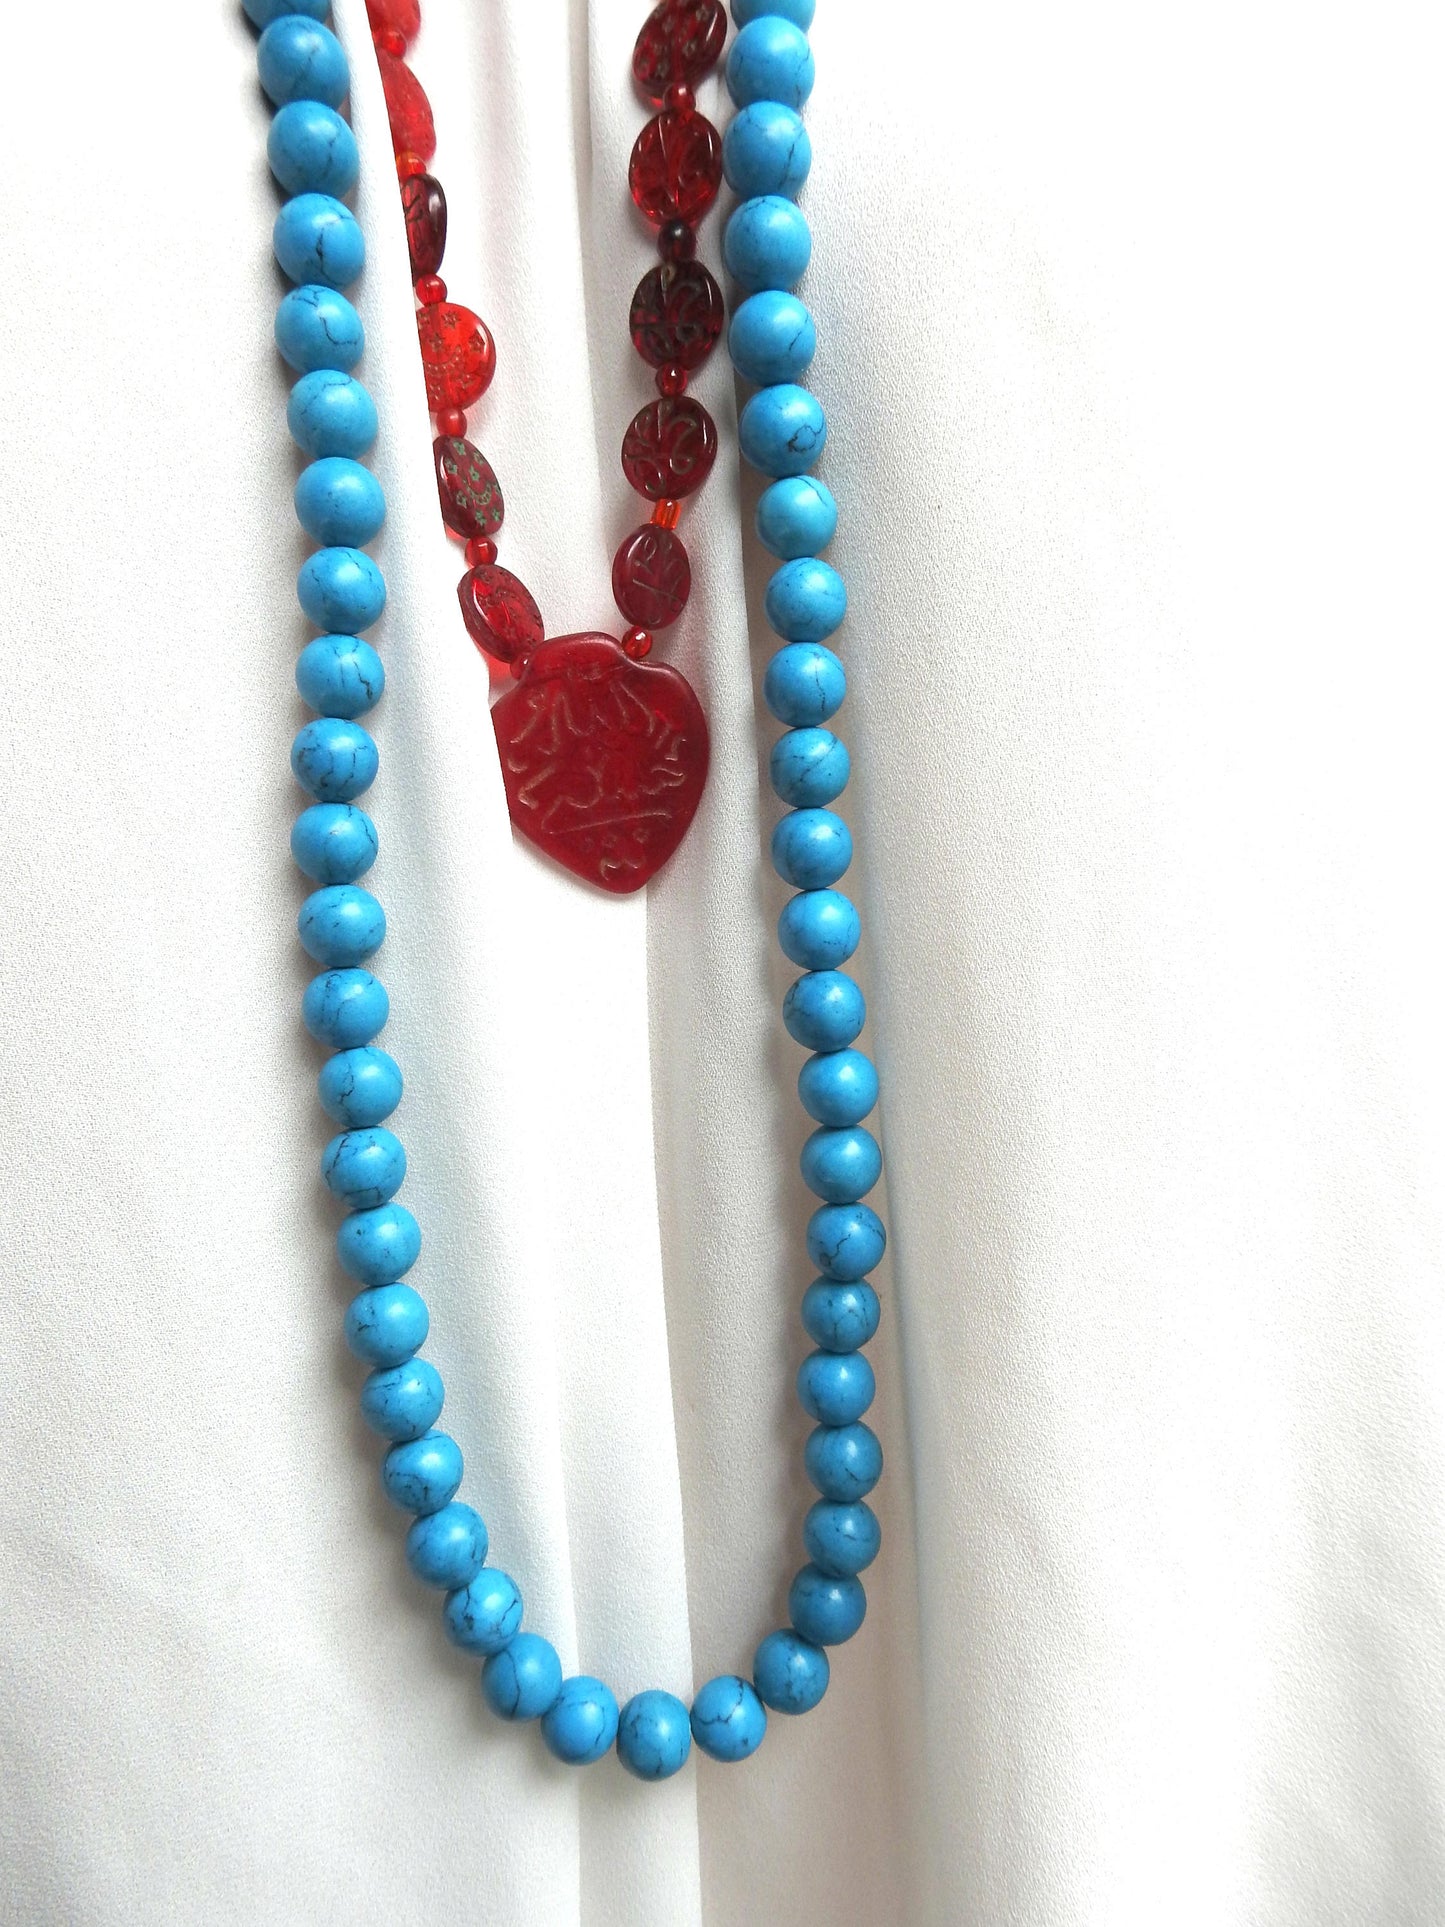 Bohemian Style Beaded Necklaces for Women - Set of 2 (Turquoise Blue and Garnet Red) - Boho-chic Accessories - Gift for women